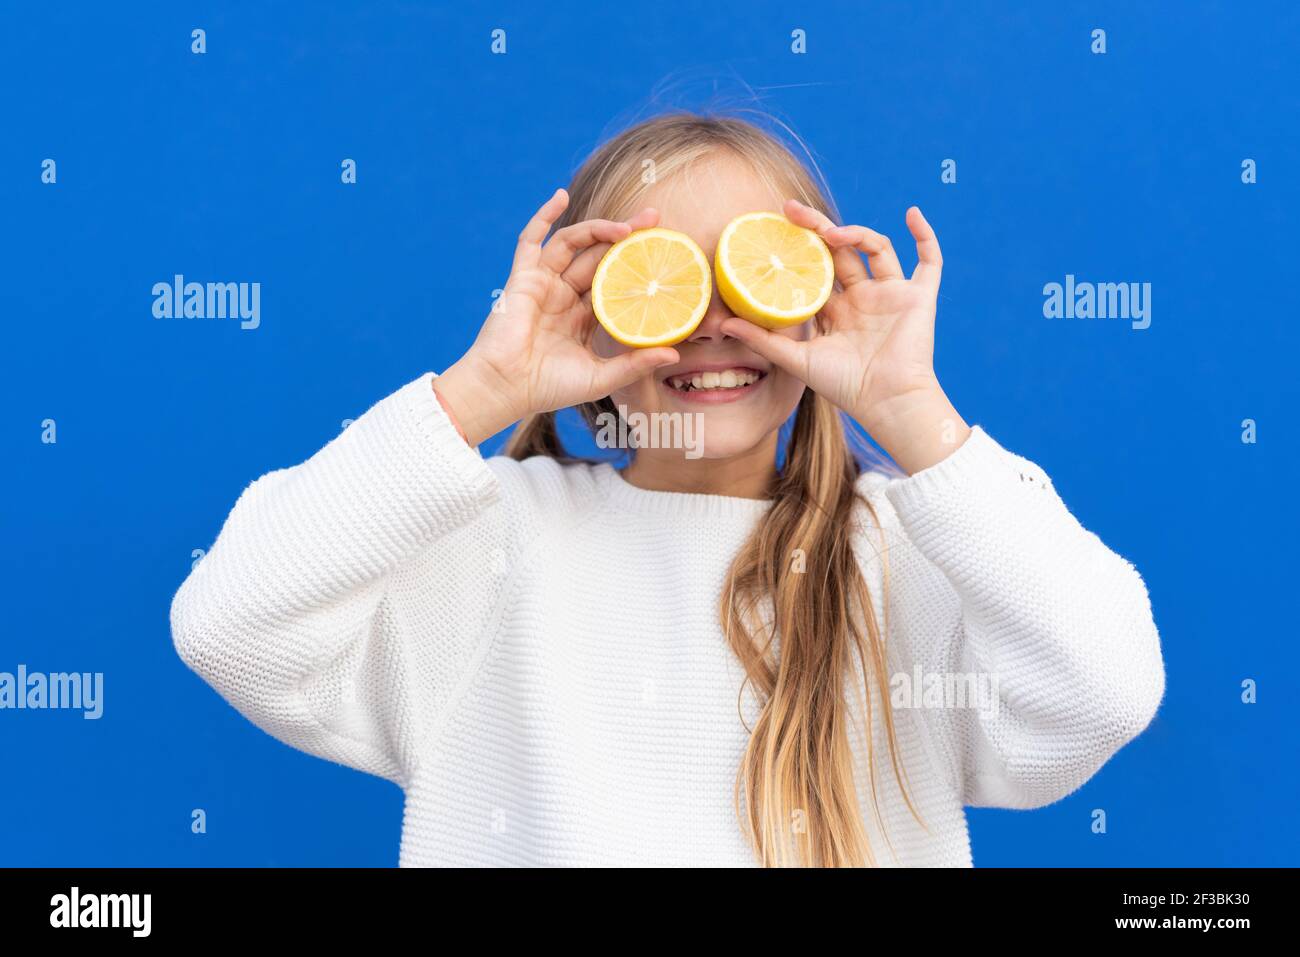 Overjoyed blond haired girl in white sweater smiling while covering eyes with bright lemon slices isolated on blue background. High quality photo Stock Photo